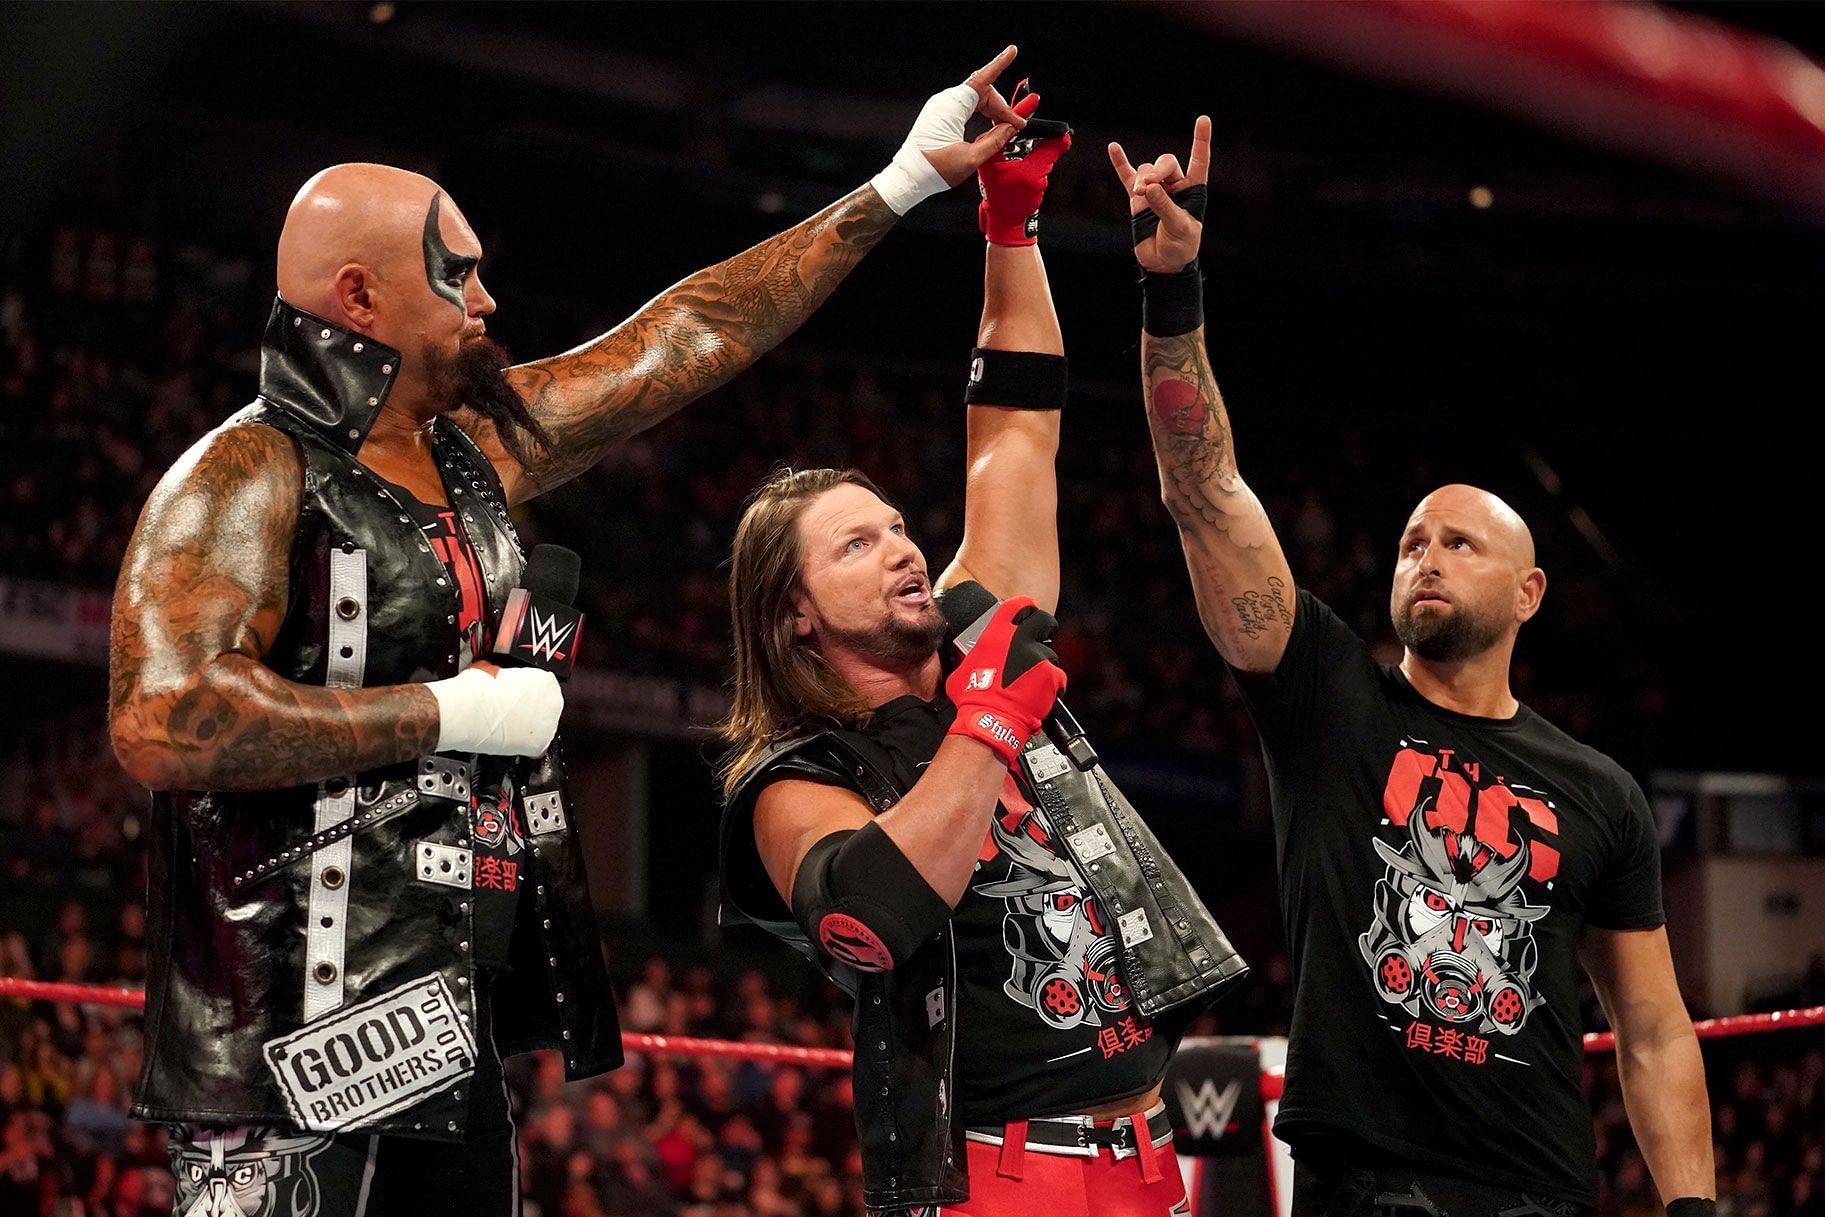 The Good Brothers returned to WWE last week to back up friend AJ Styles.